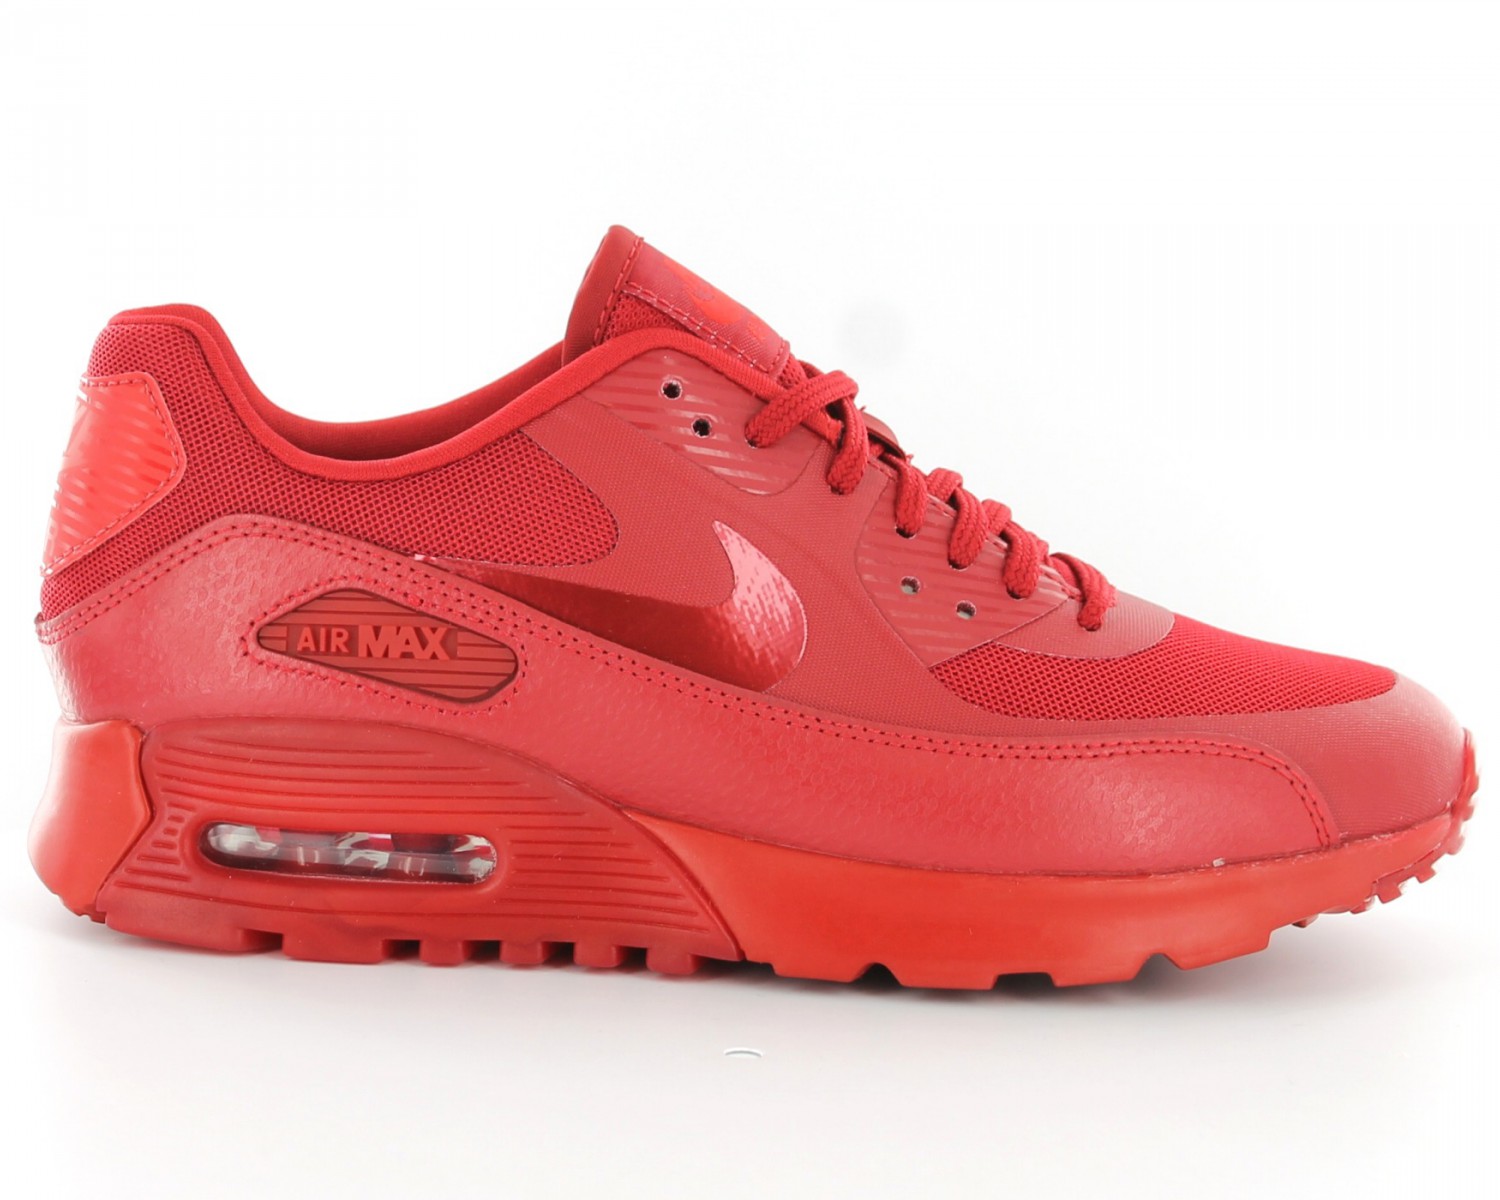 Nike Air max 90 ultra essential femme ROUGE/ROUGE 724981-601